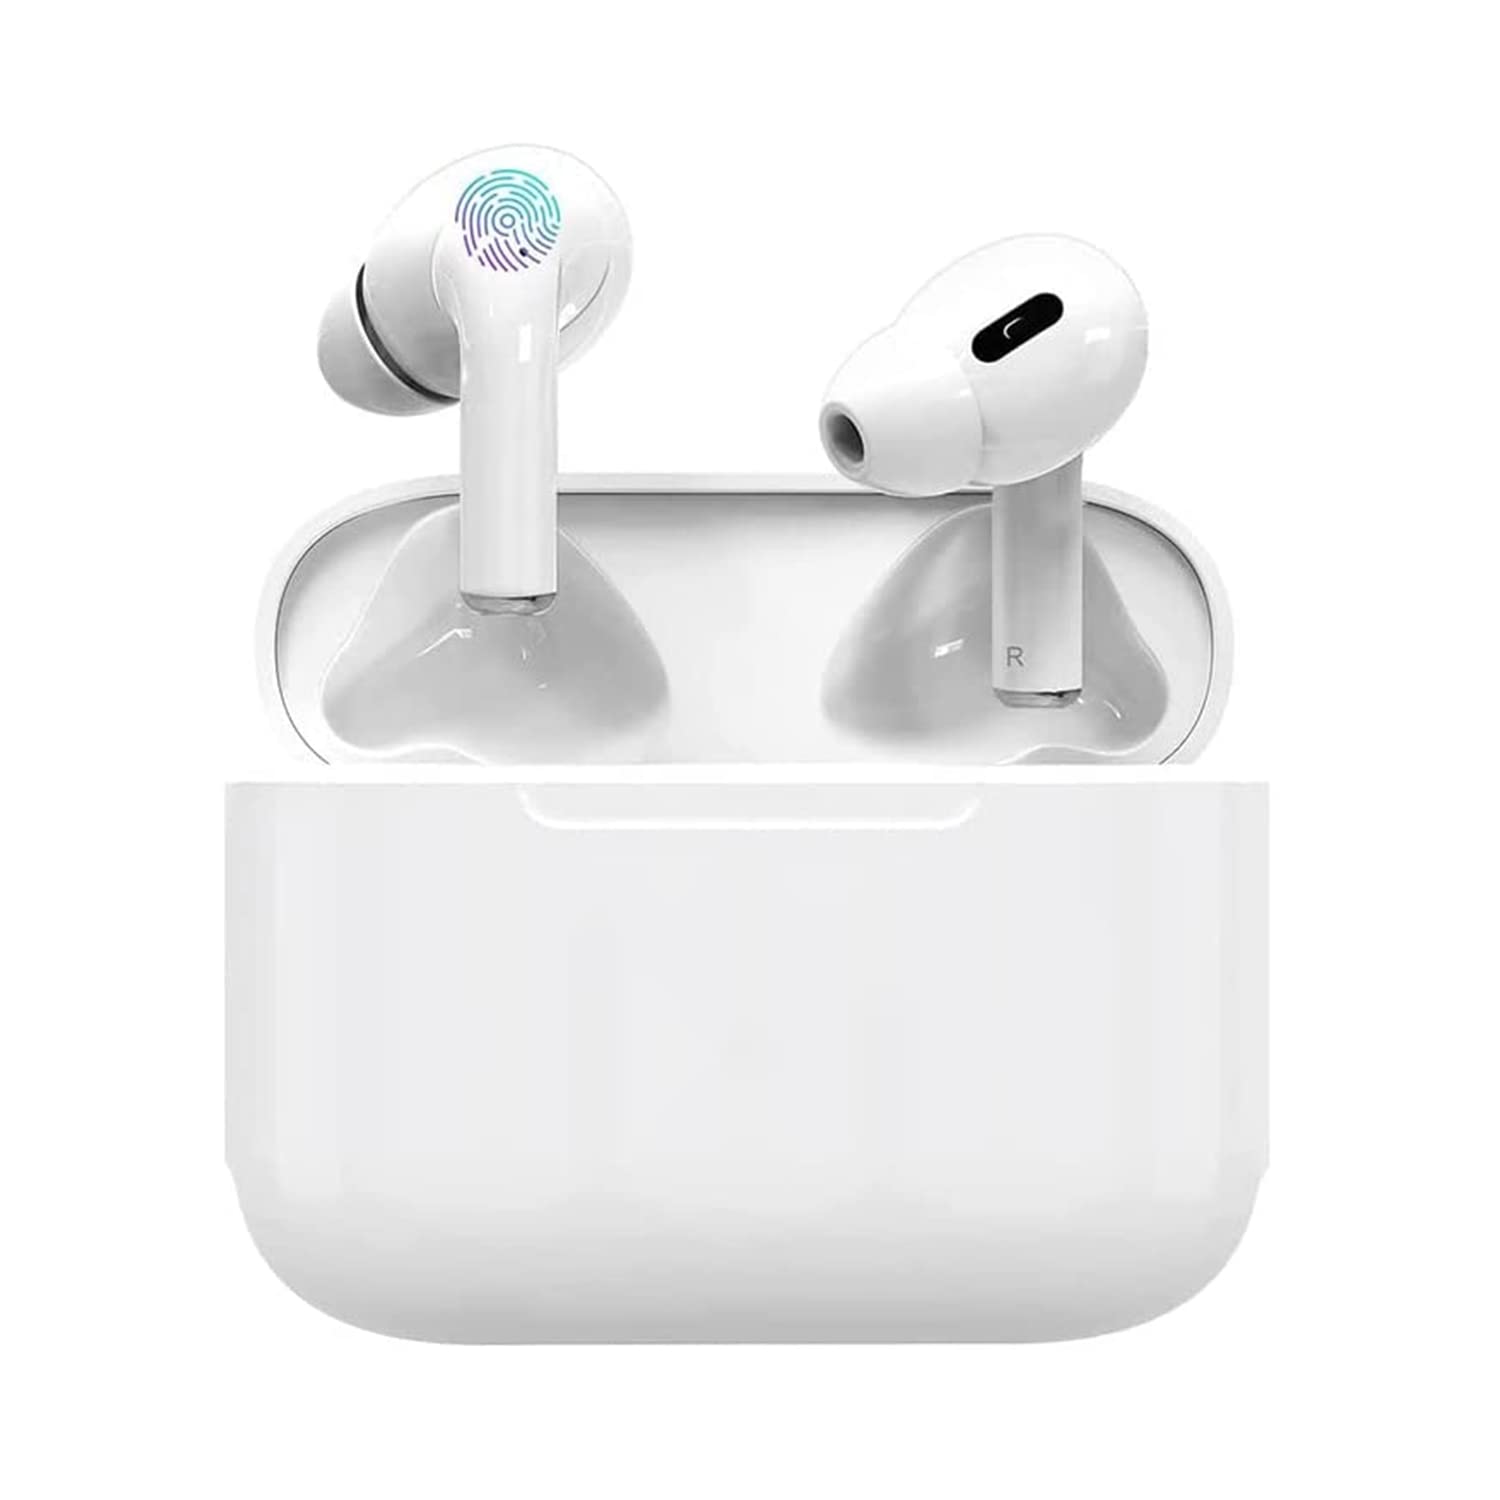 Book Cover [Apple MFi Certified] AirPods Pro Wireless Earbuds, Wireless Headset with Touch Control, Noise Cancelling, Built-in Microphone with Charging case White W01